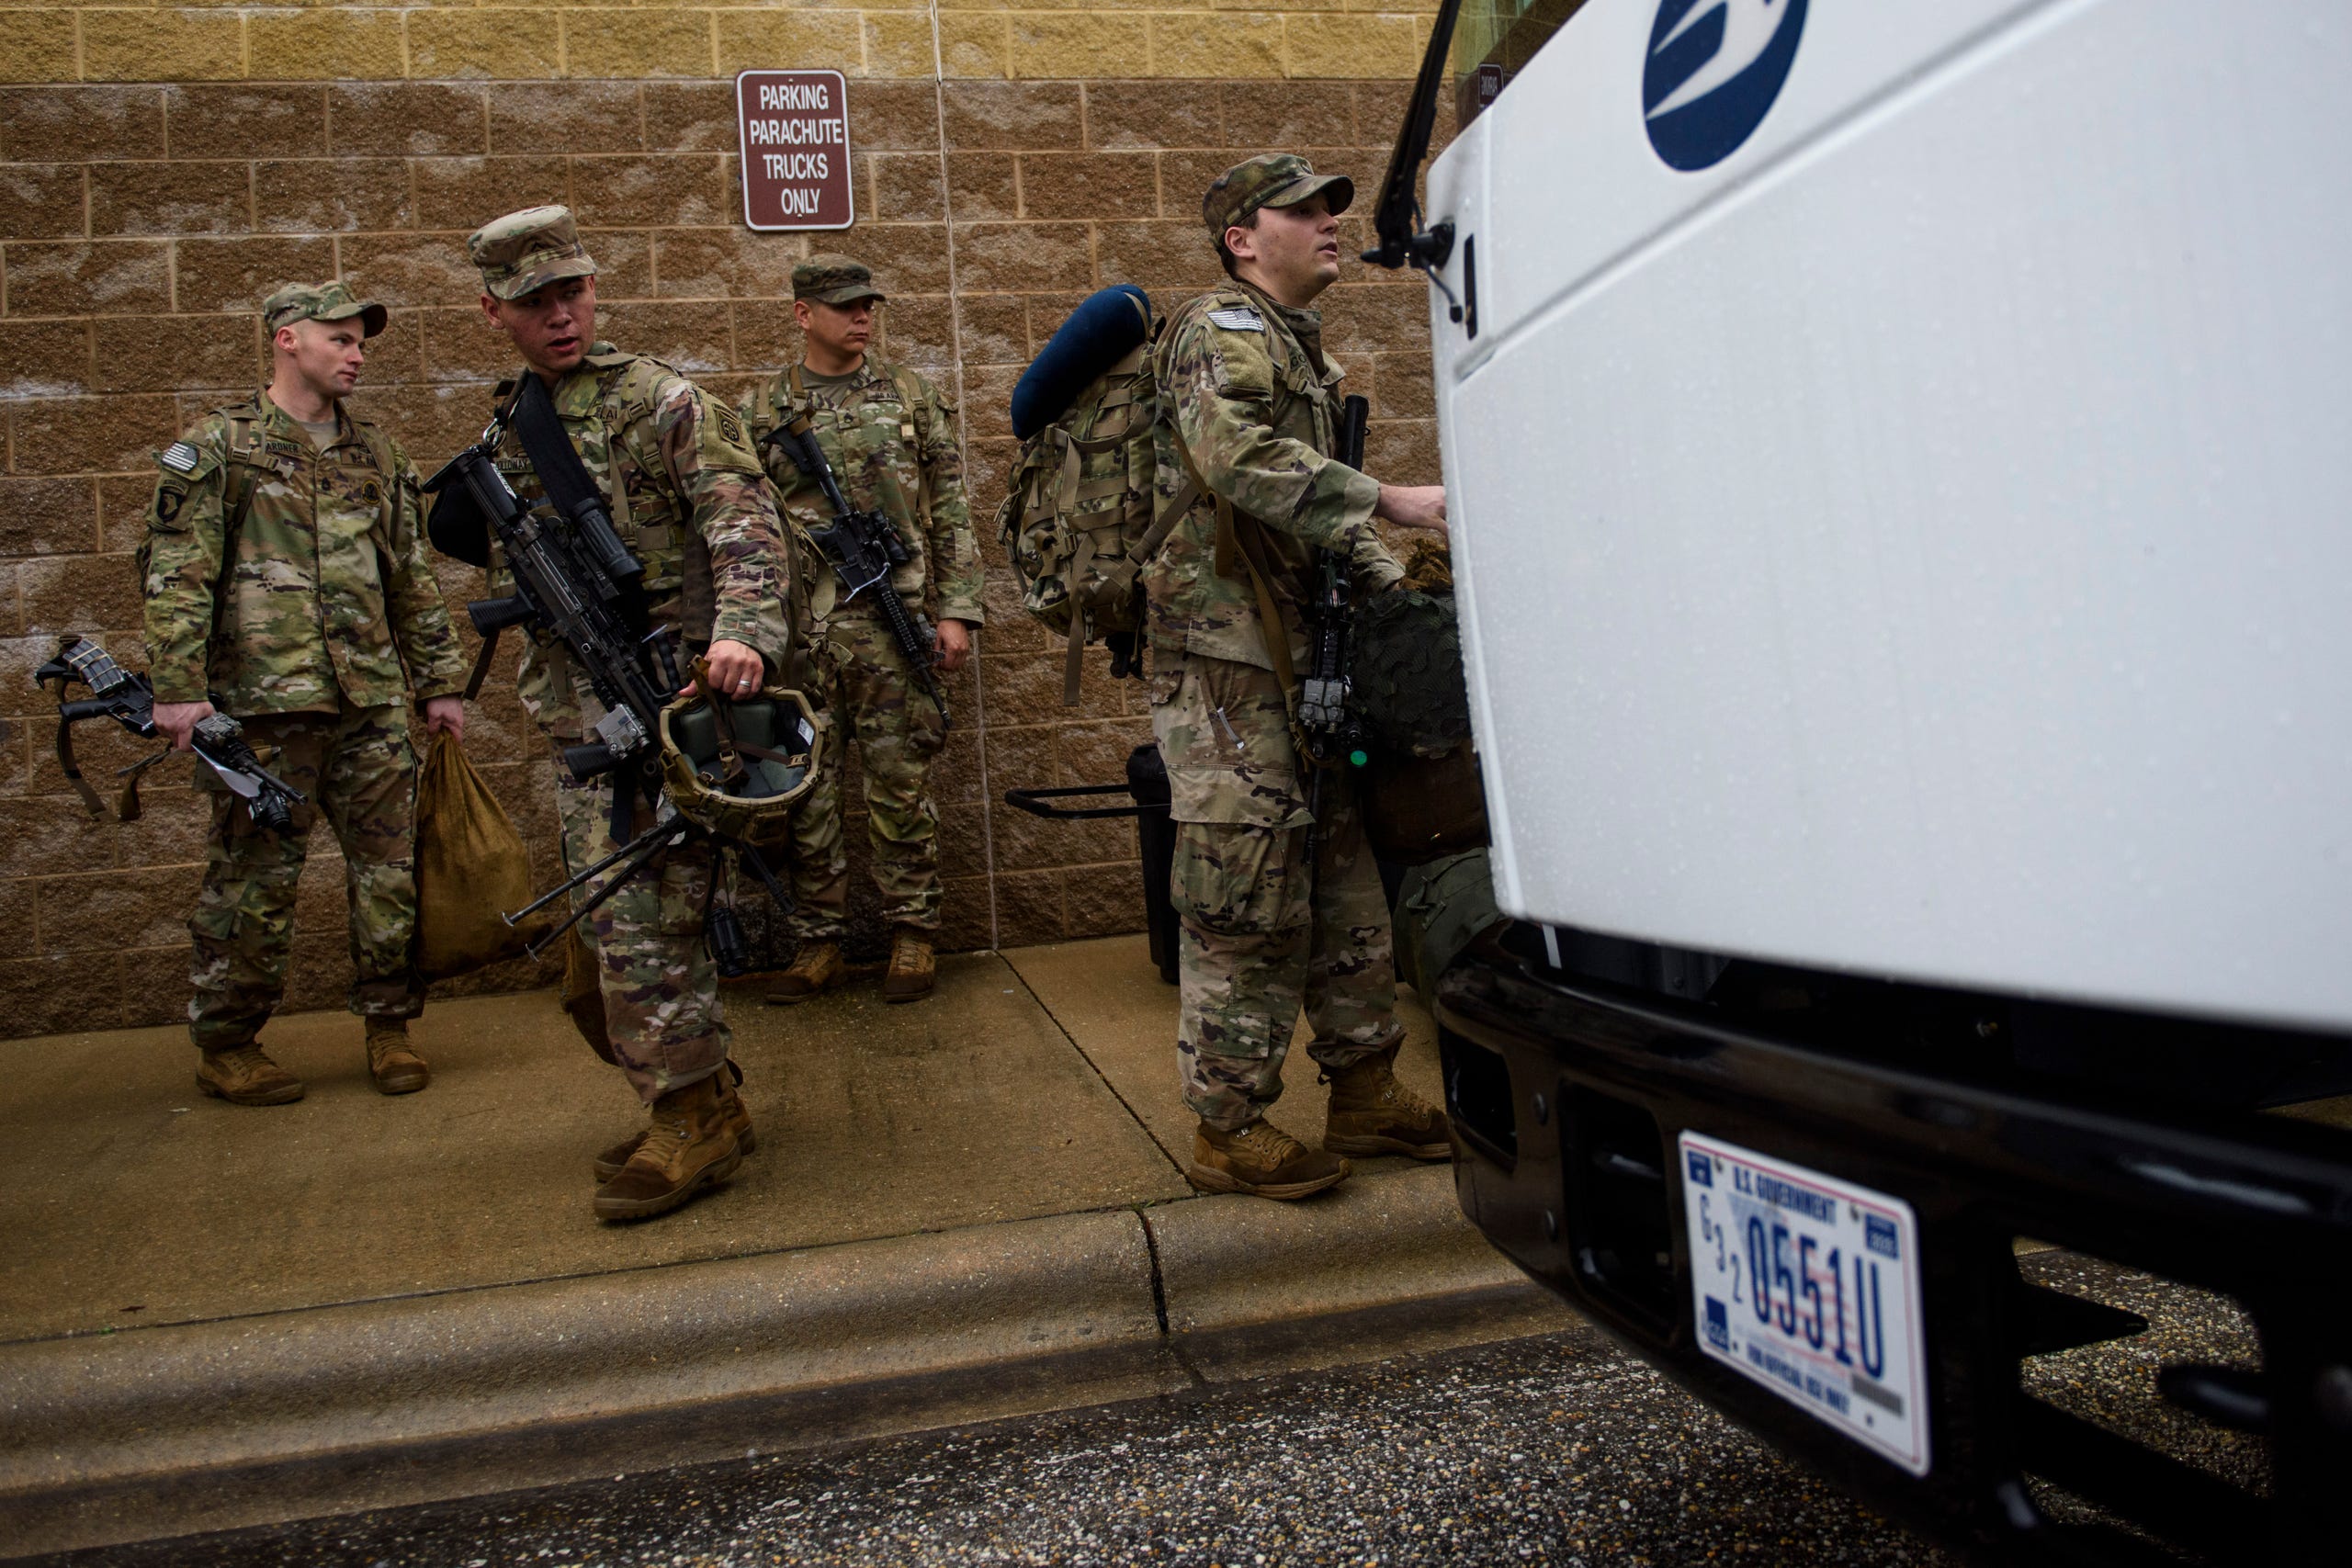 Soldiers with the 82nd Airborne Division arrive at Green Ramp on Fort Bragg before deploying to the Middle East.